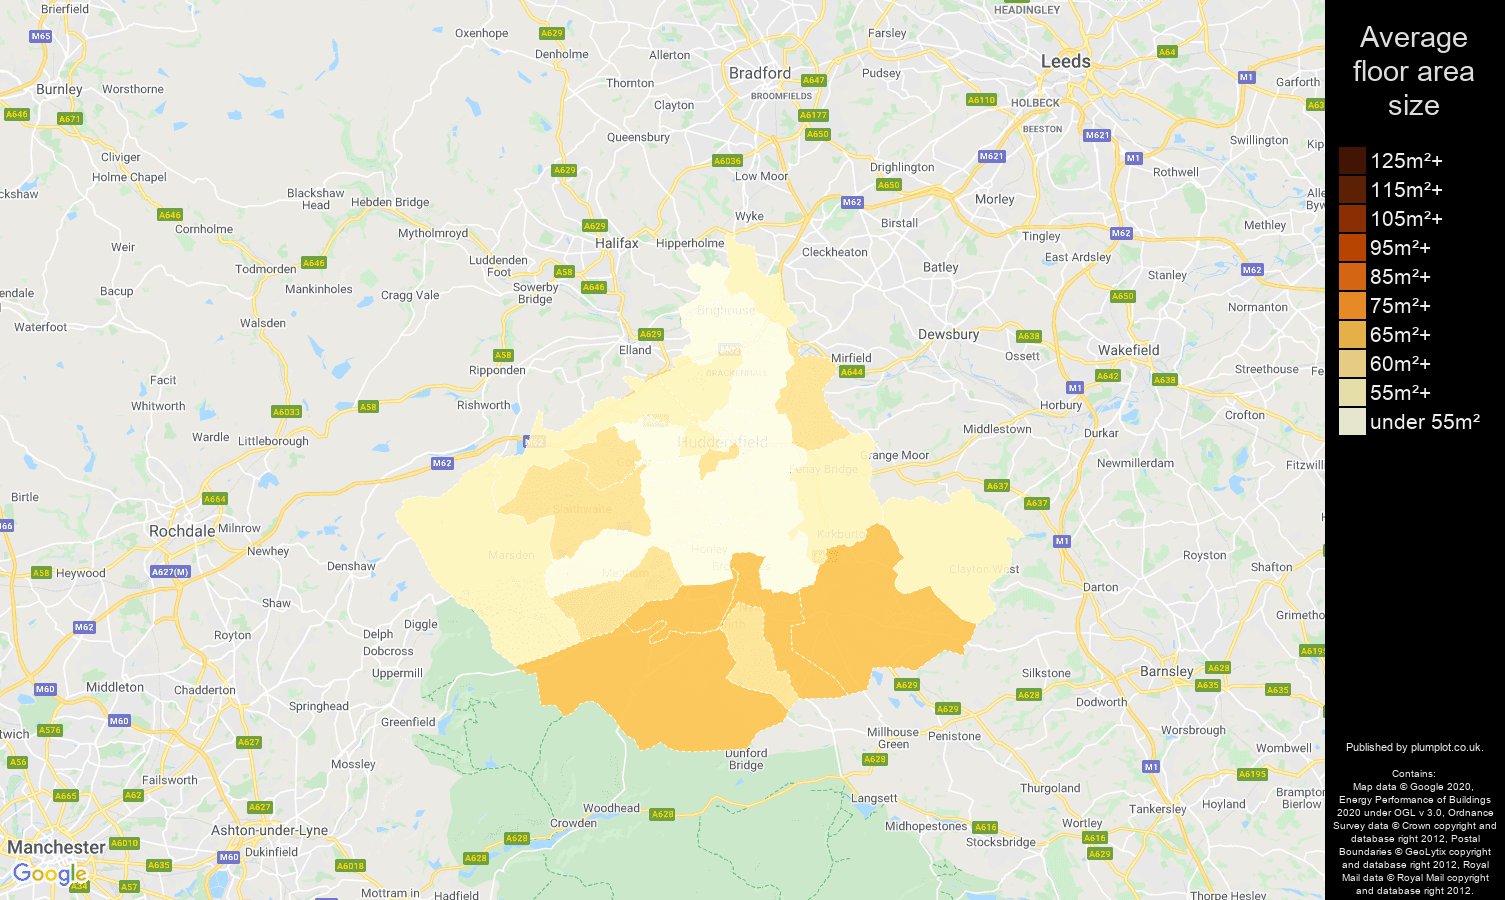 Huddersfield map of average floor area size of flats